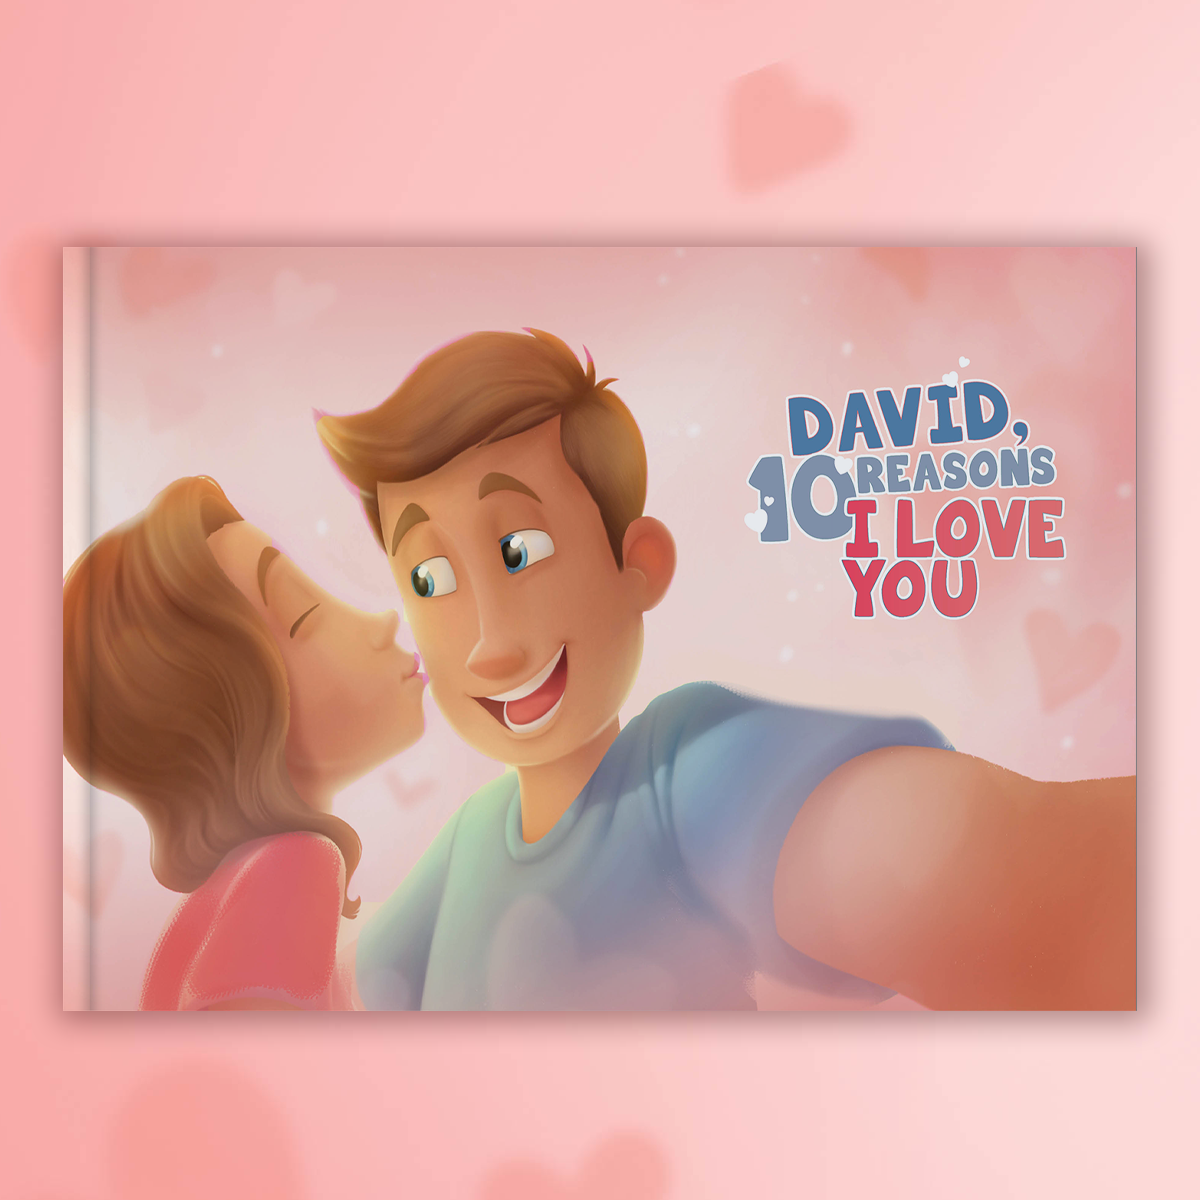 10 Reasons Why I Love You Personalized Book